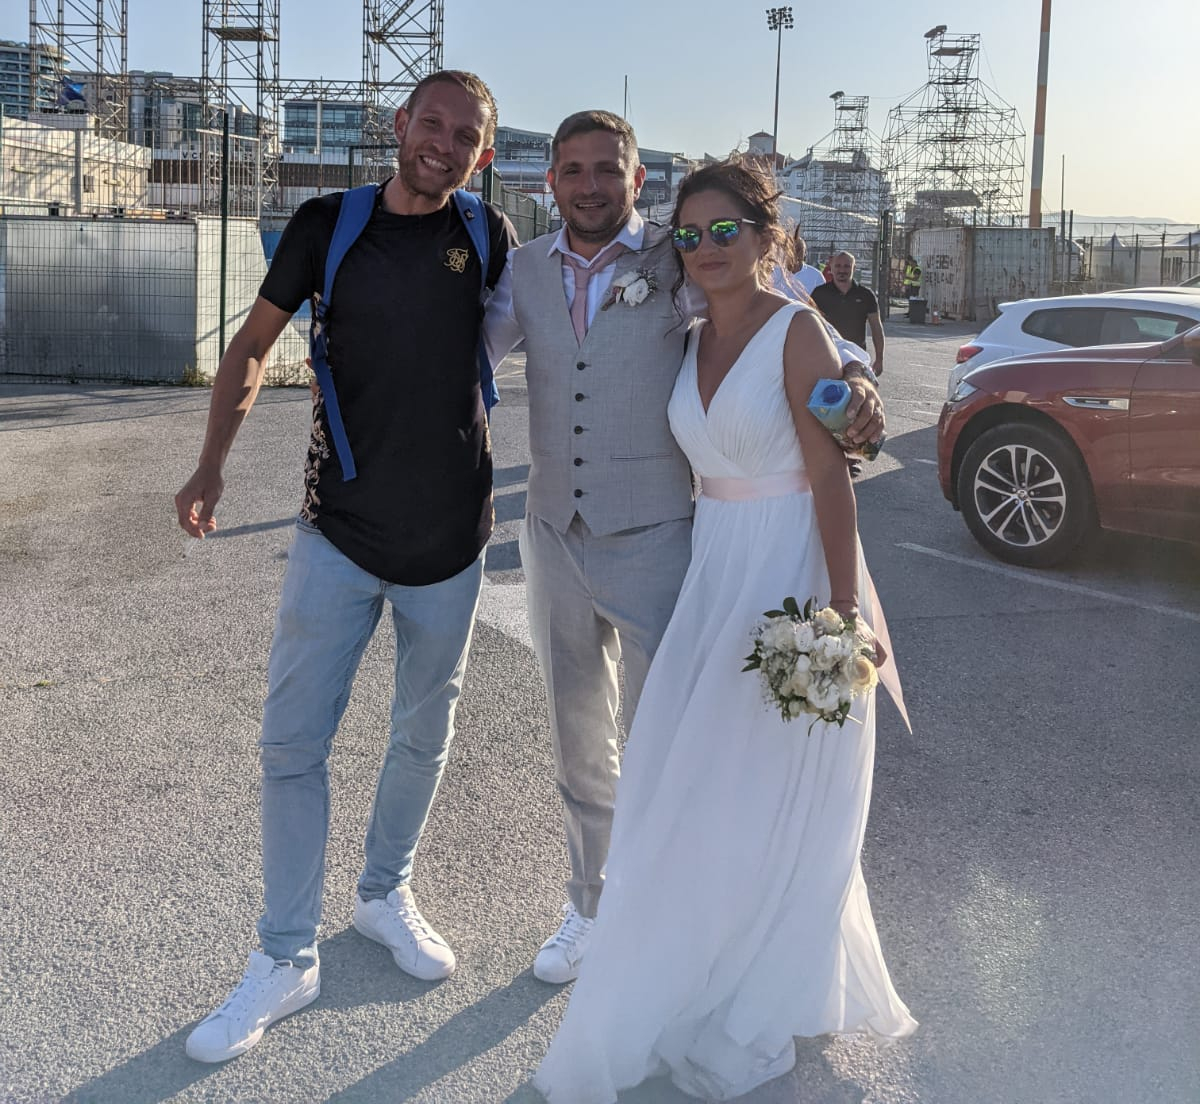 Ben Horlock with newly-married couple at Victoria Stadium